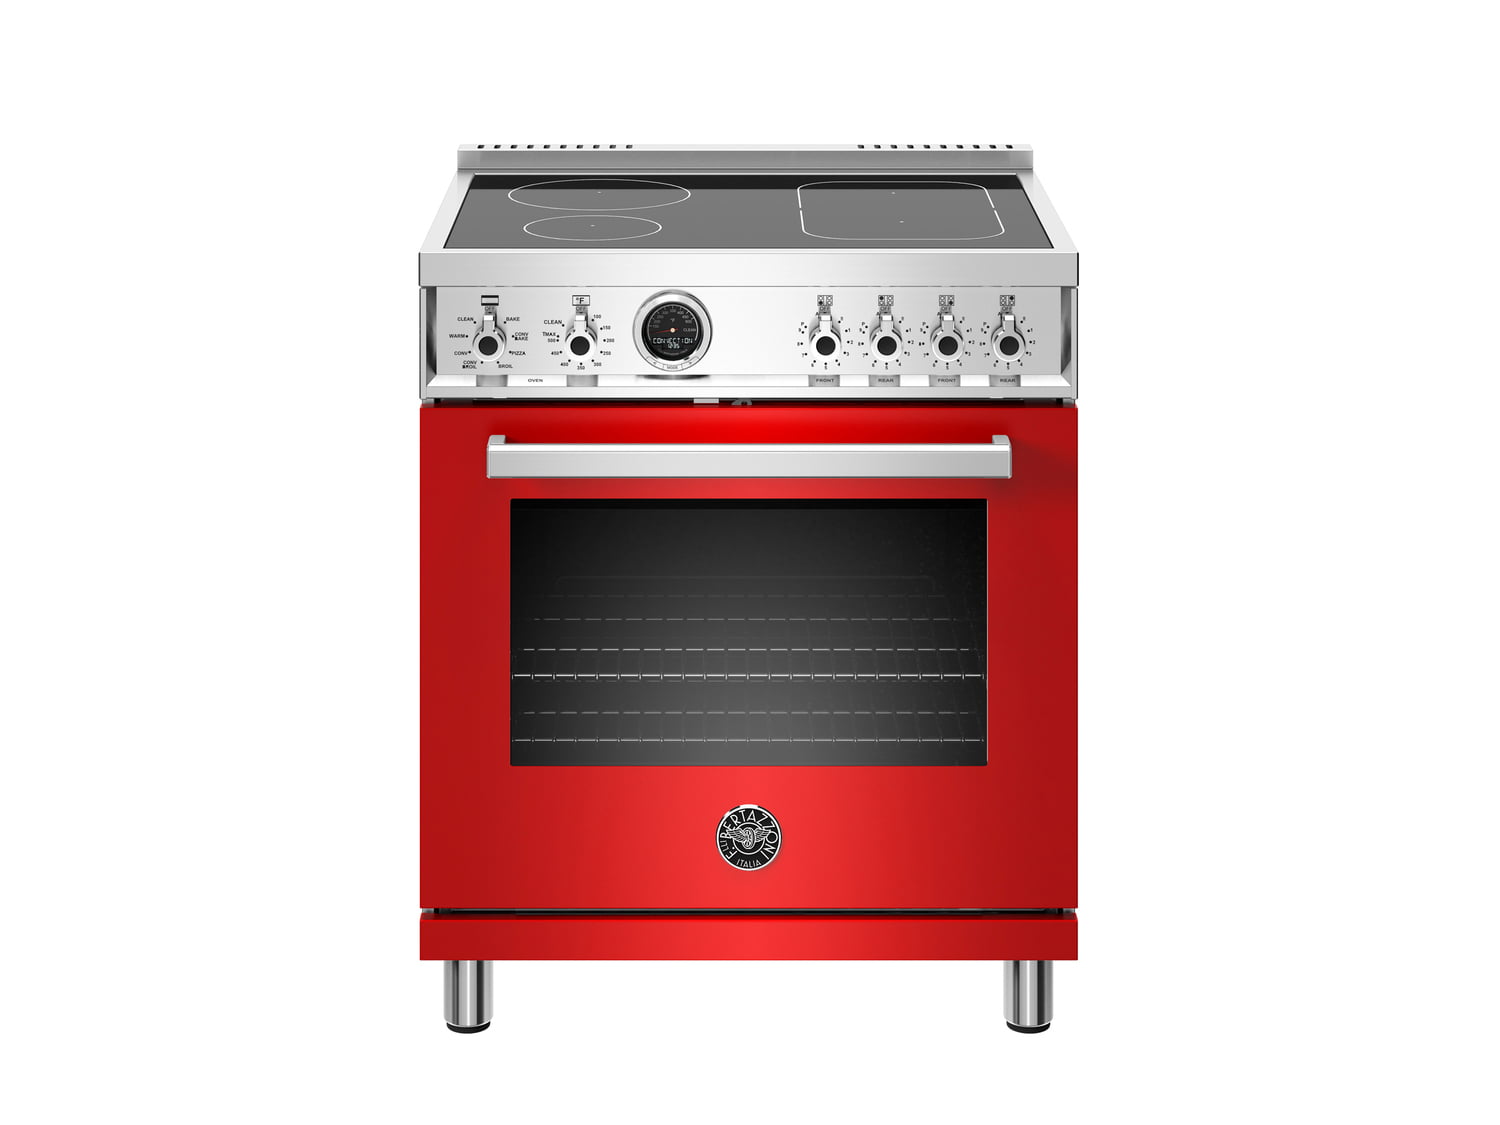 Bertazzoni PROF304INSROT 30 Inch Induction Range, 4 Heating Zones, Electric Self-Clean Oven Rosso